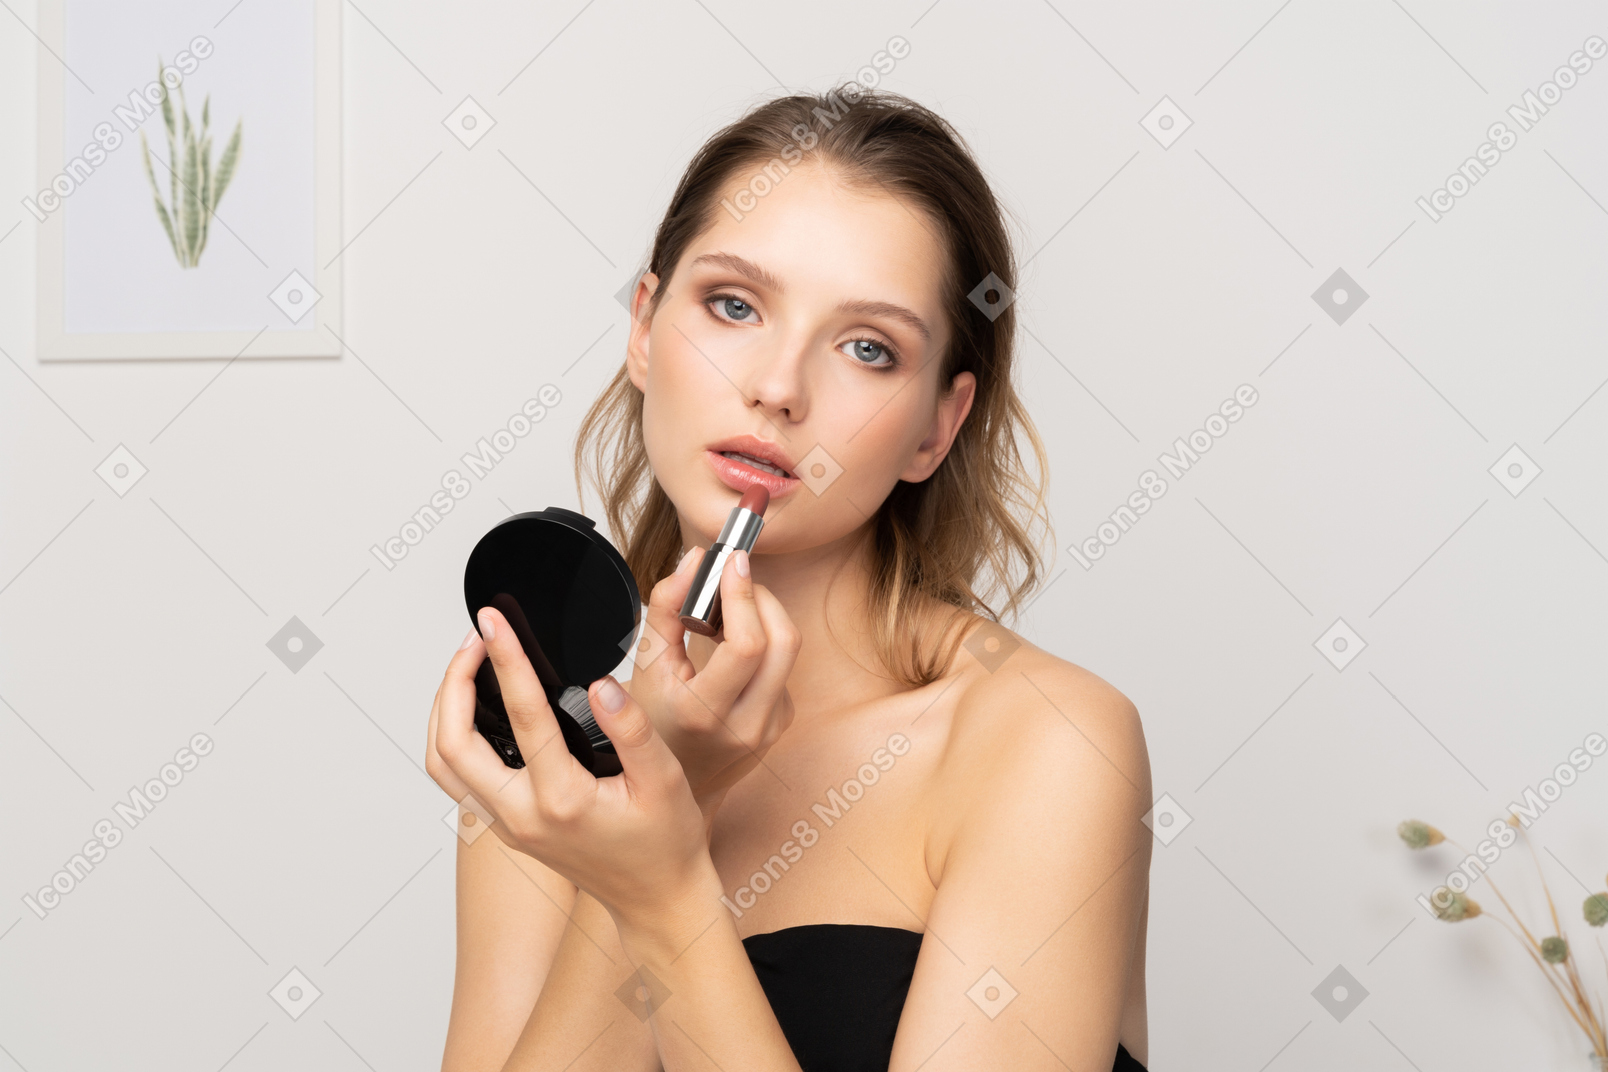 Front view of a young woman applying lipstick while holding a mirror